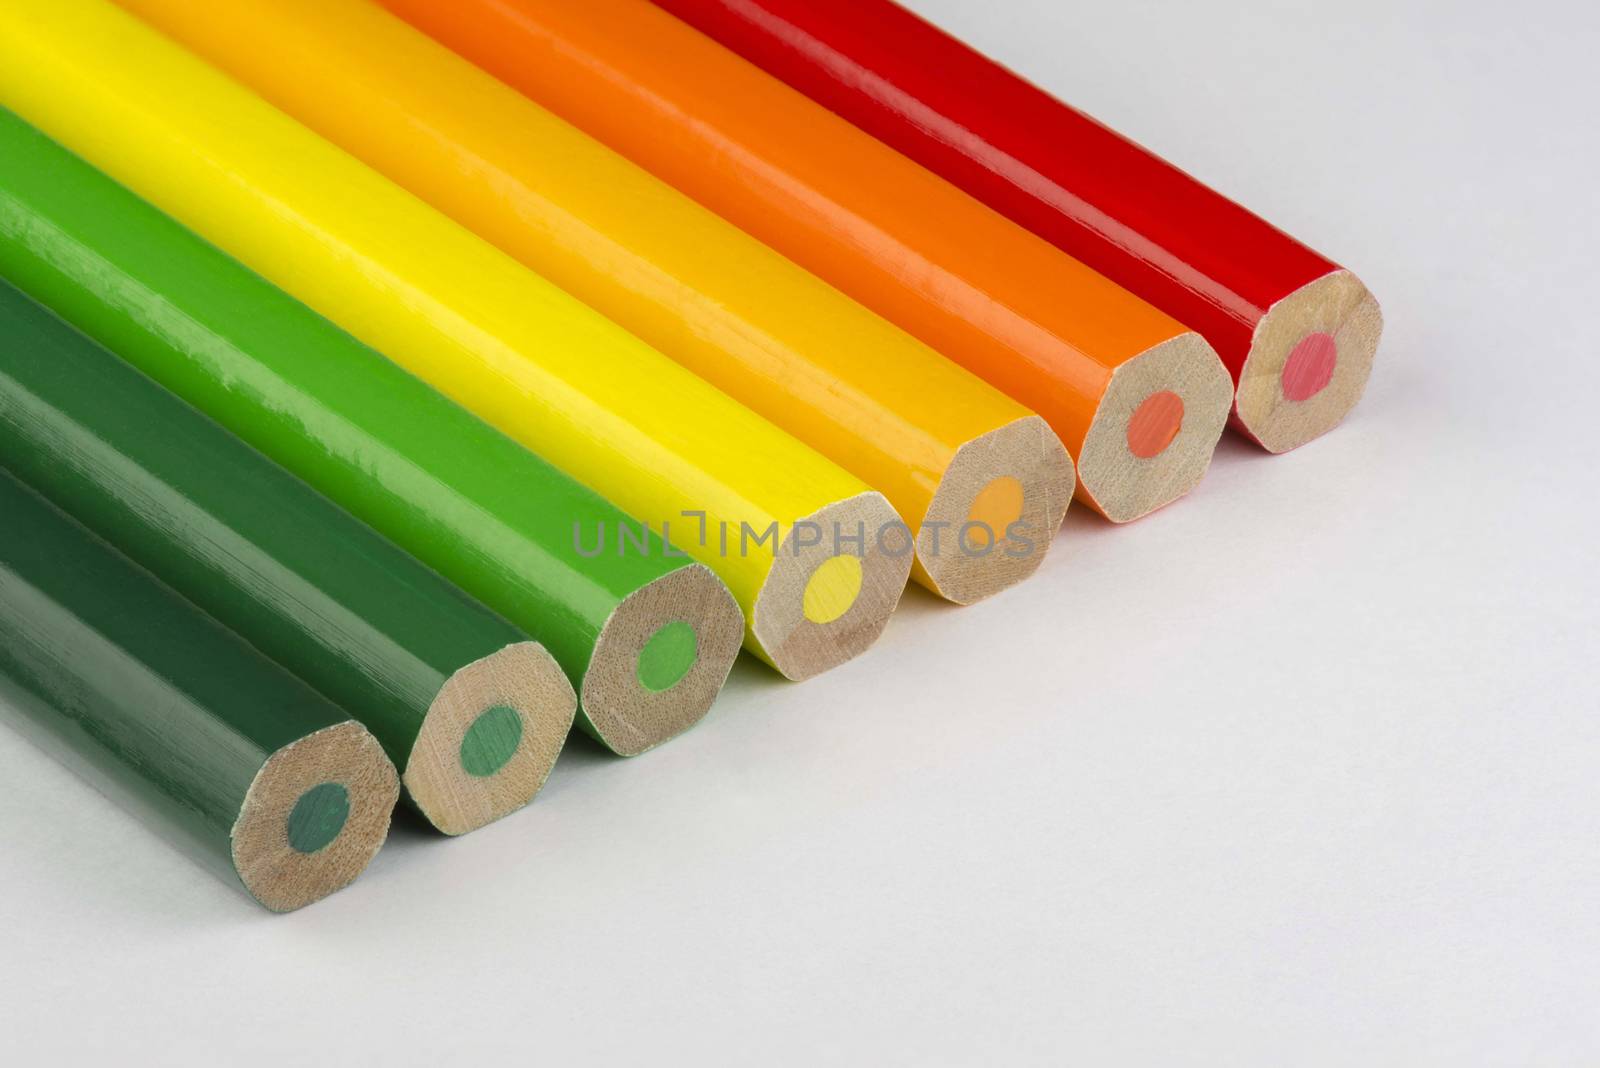 Conceptual crayons as energy label colors
 by Tofotografie